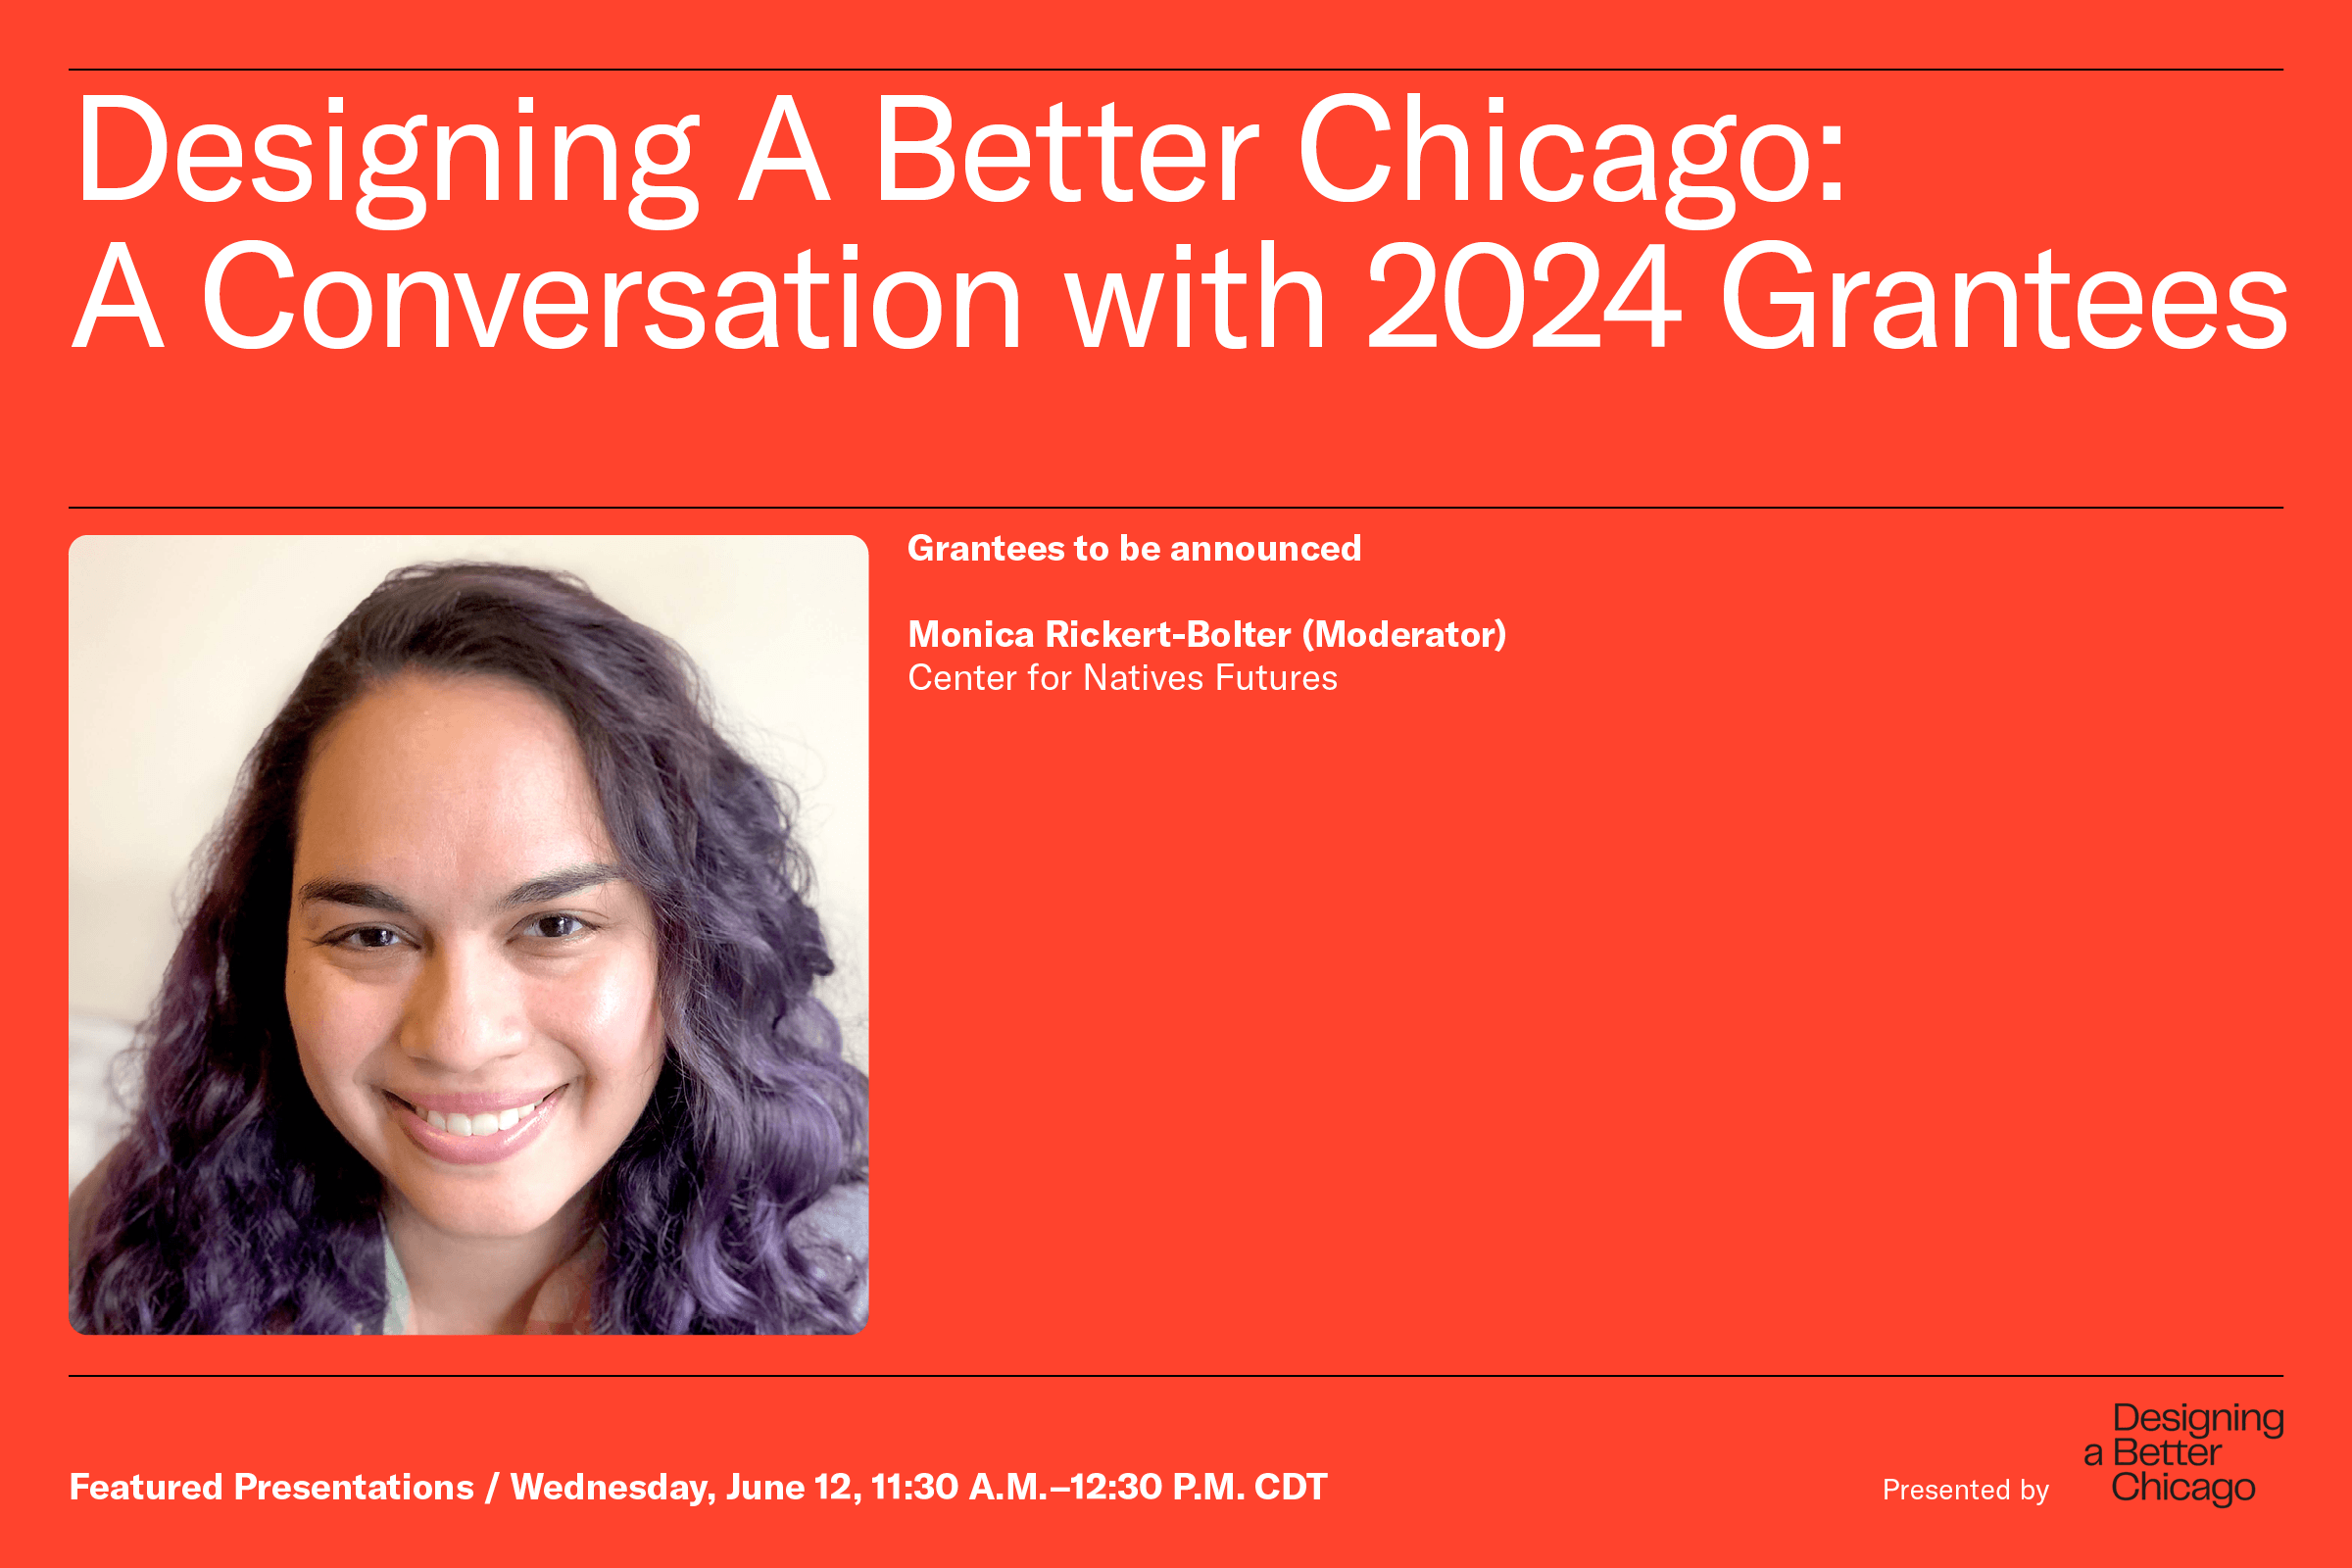 Designing a Better Chicago: A Conversation with 2024 Grantees - Grantees to be announced - Monica Rickert-Bolter (Moderator), Center for Native Futures - Featured Presentations / Wednesday, June 12, 11:30 a.m. - 12:30 p.m. CDT - Presented by Designing a Better Chicago